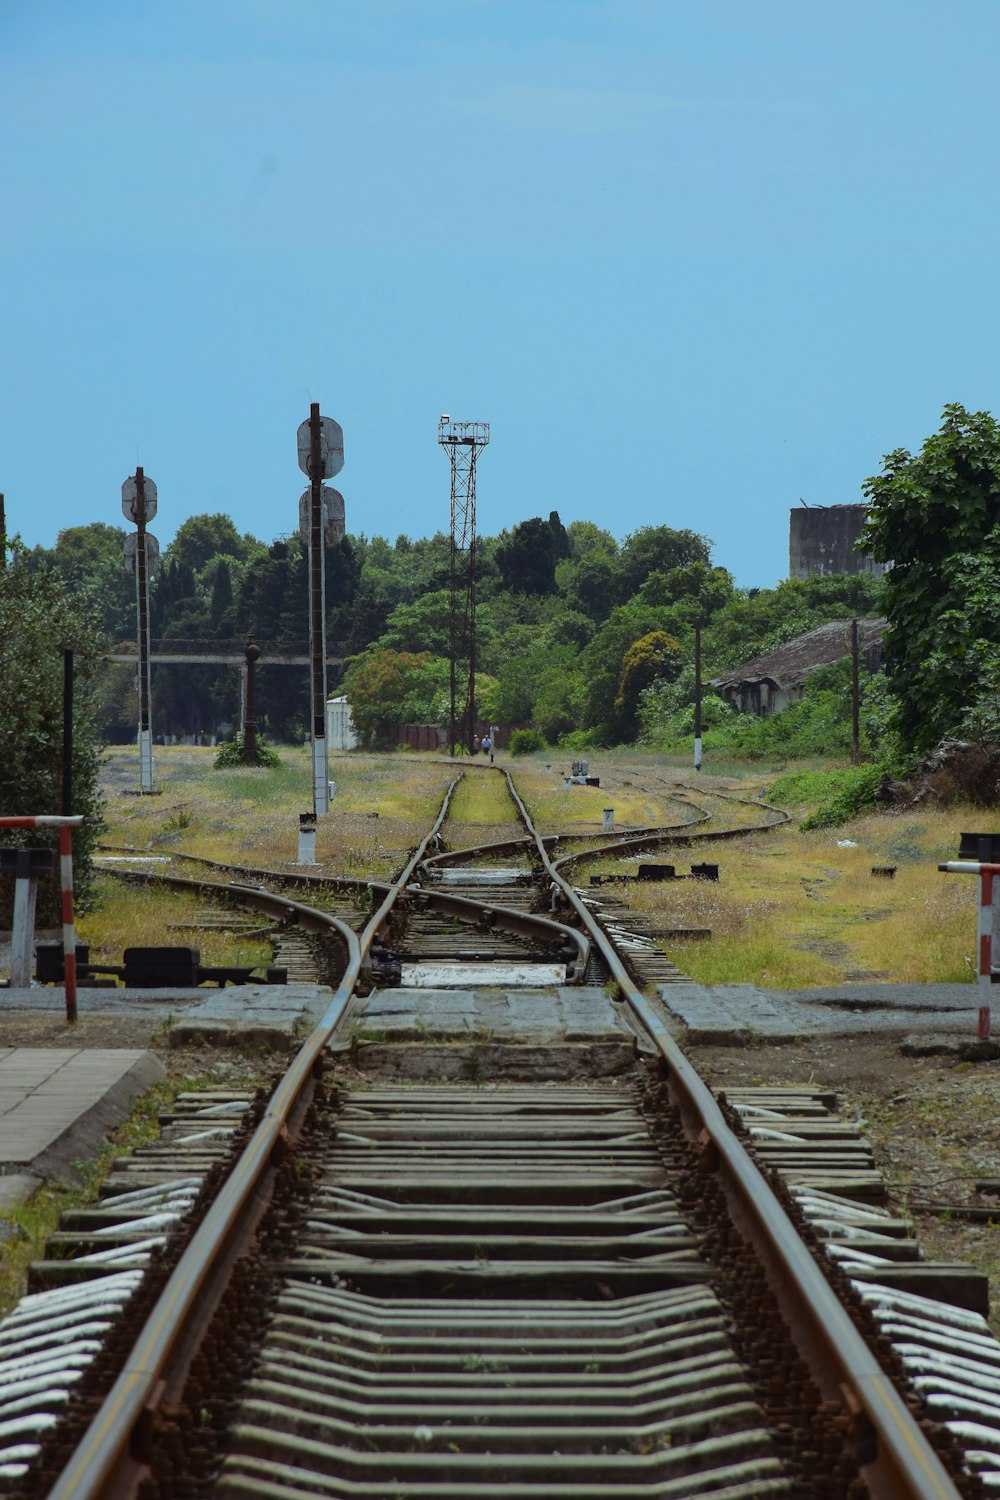 a view of a train track from the end of the track